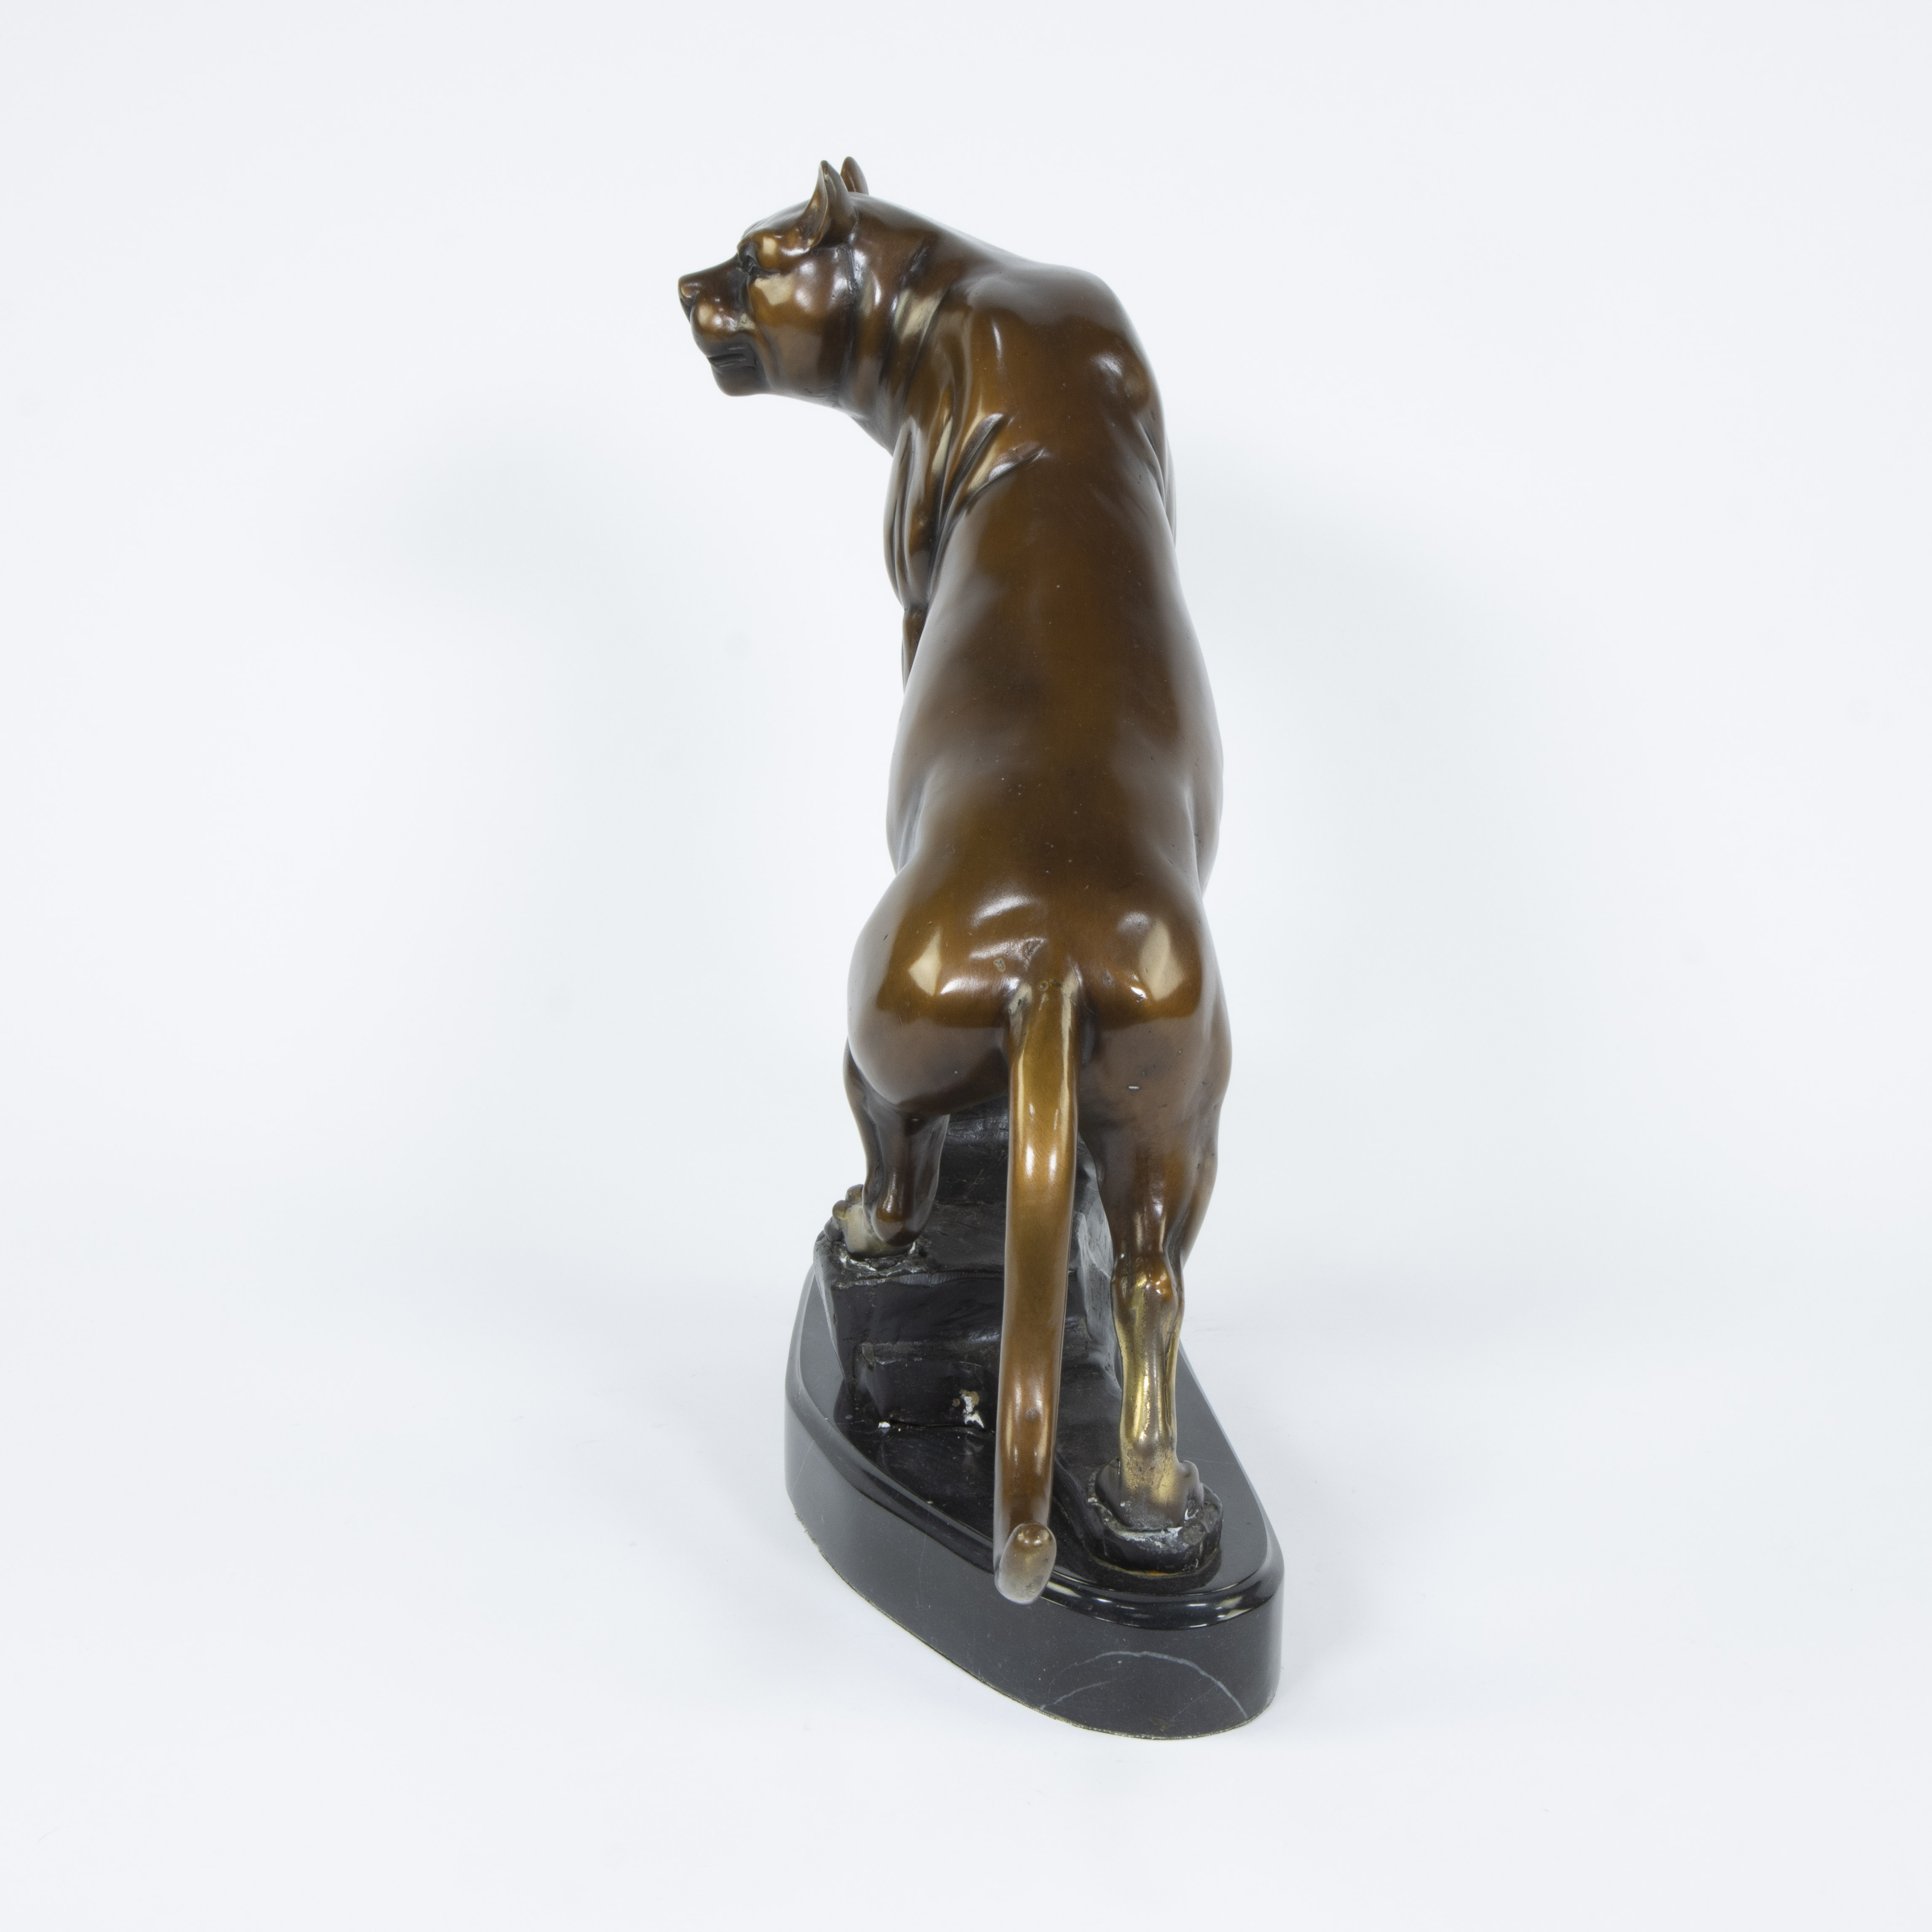 Panther in patinated spelter, signed Marino, numbered 14/500 and dated 2007 - Image 4 of 5